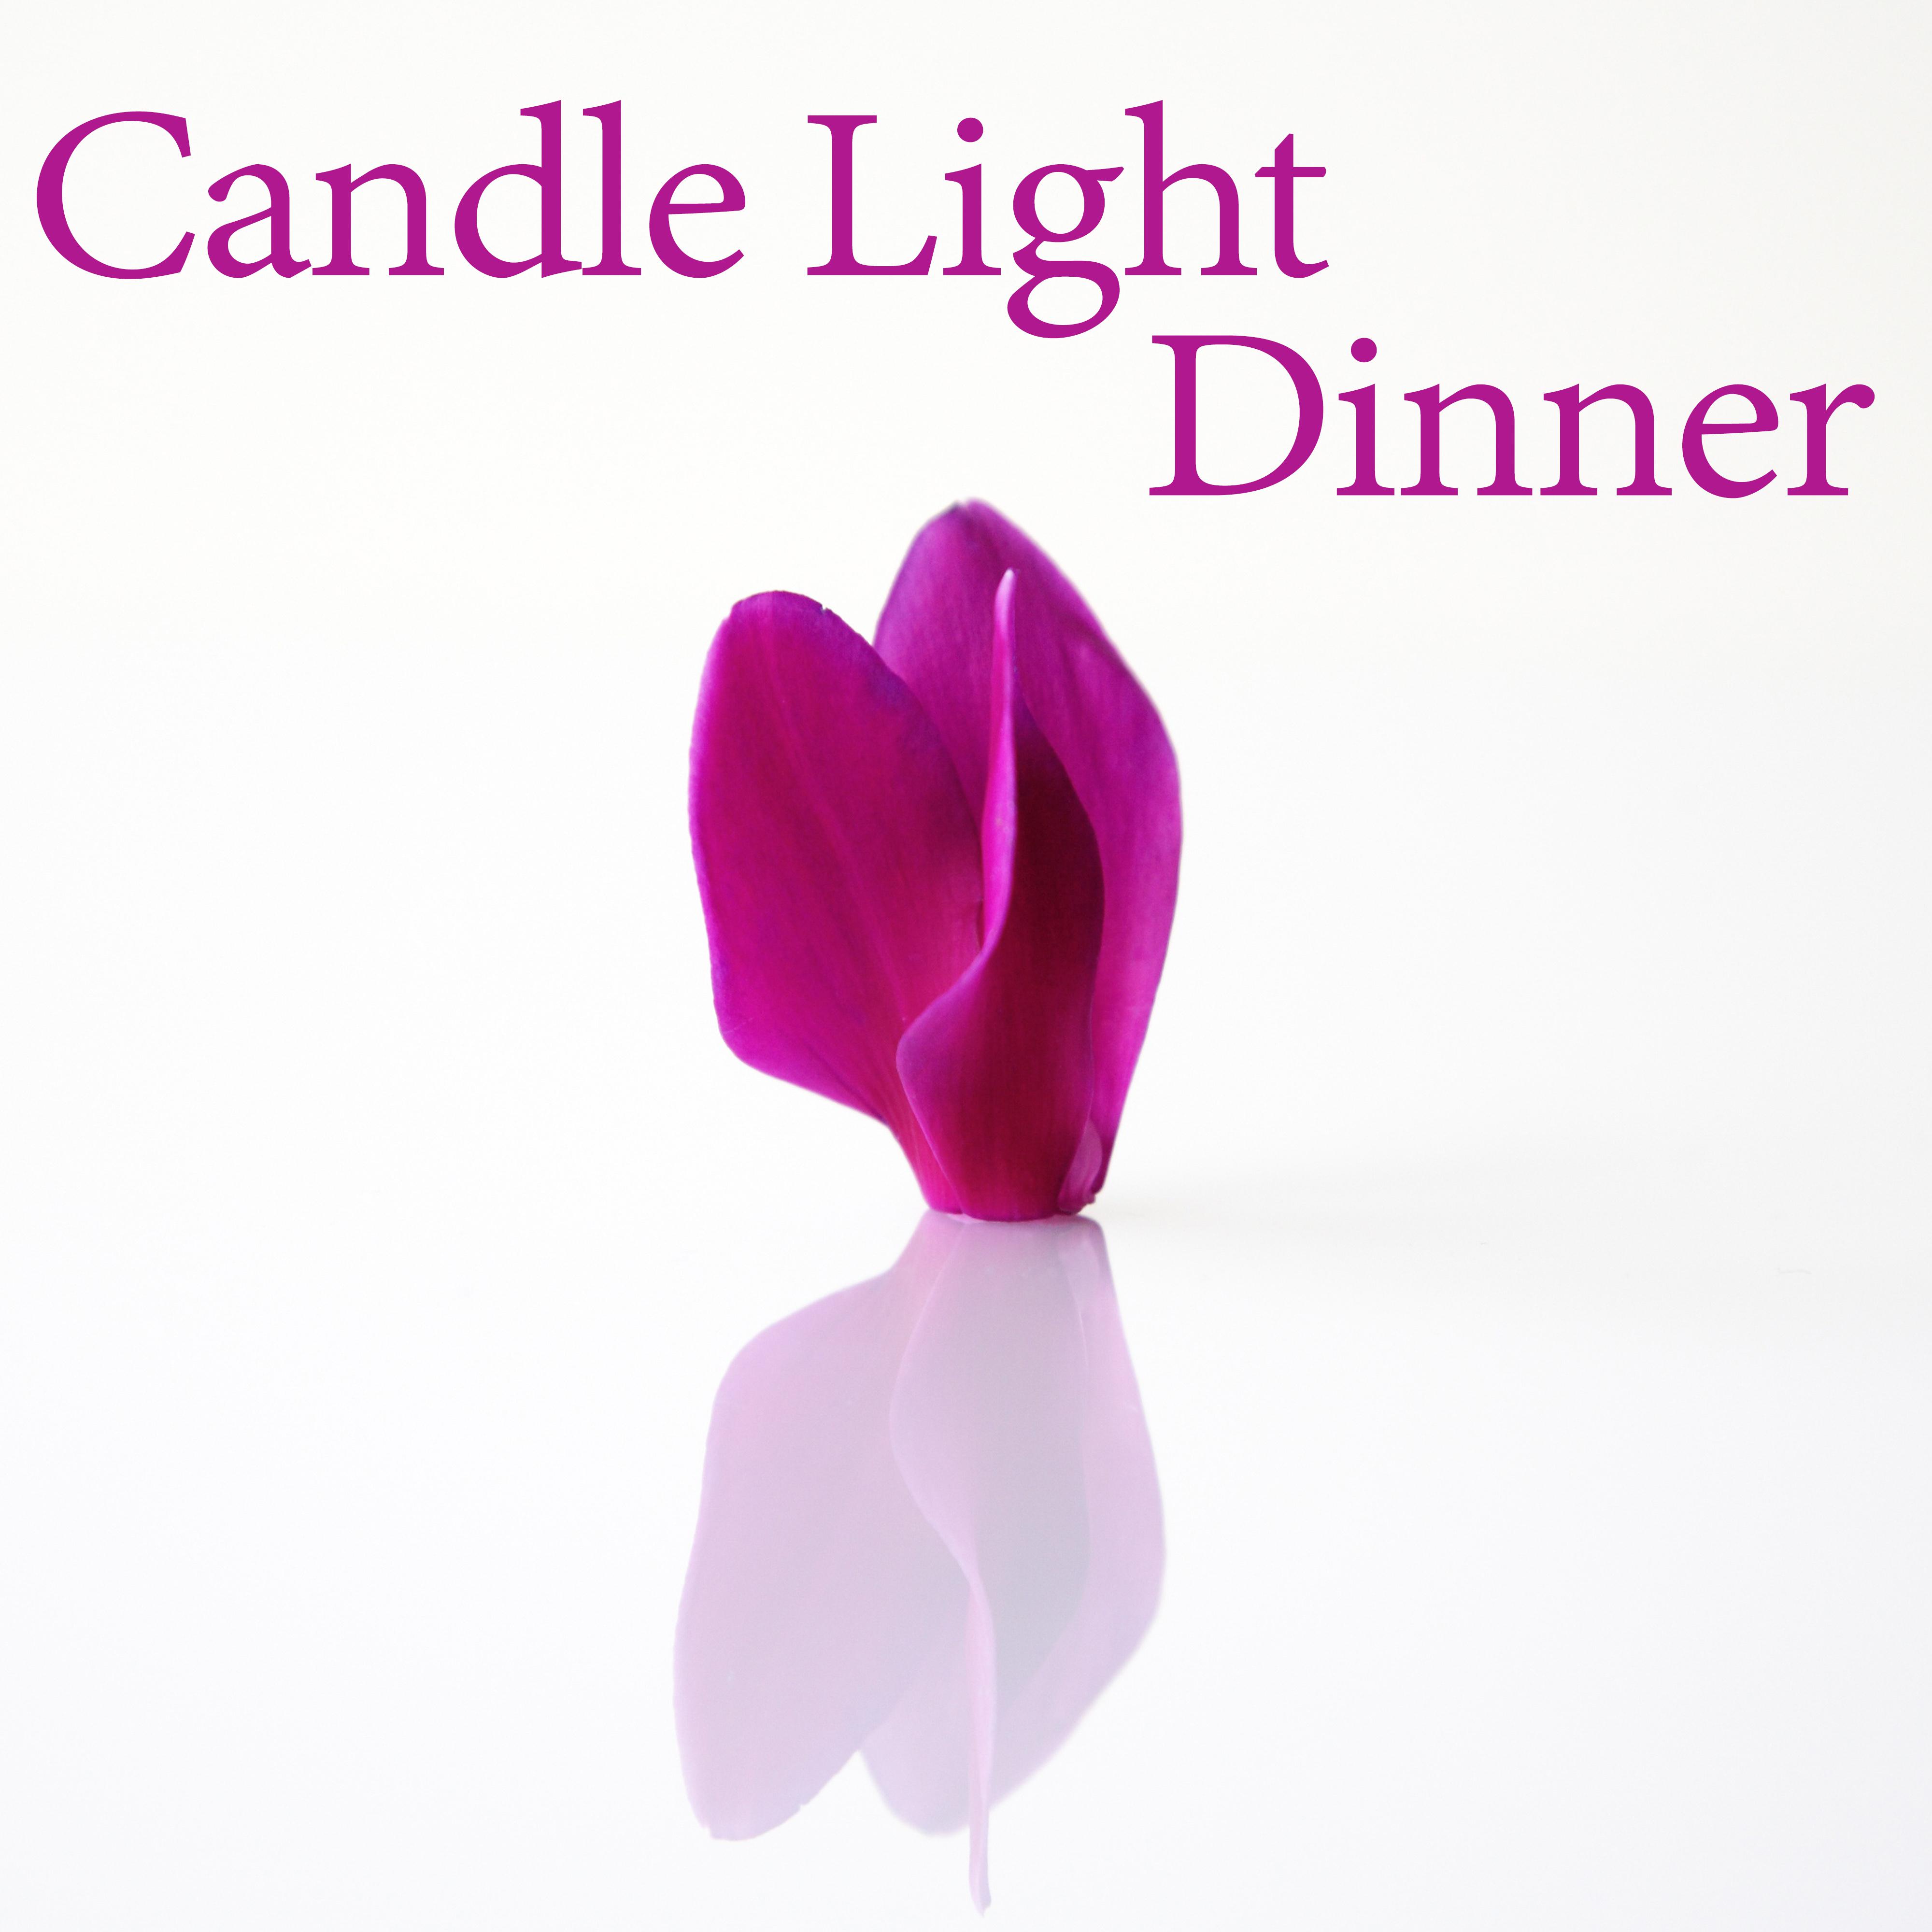 Candle Light Dinner - Dinner for Two, Mellow Jazz, Soft Jazz Sounds for Lovers, **** Evening